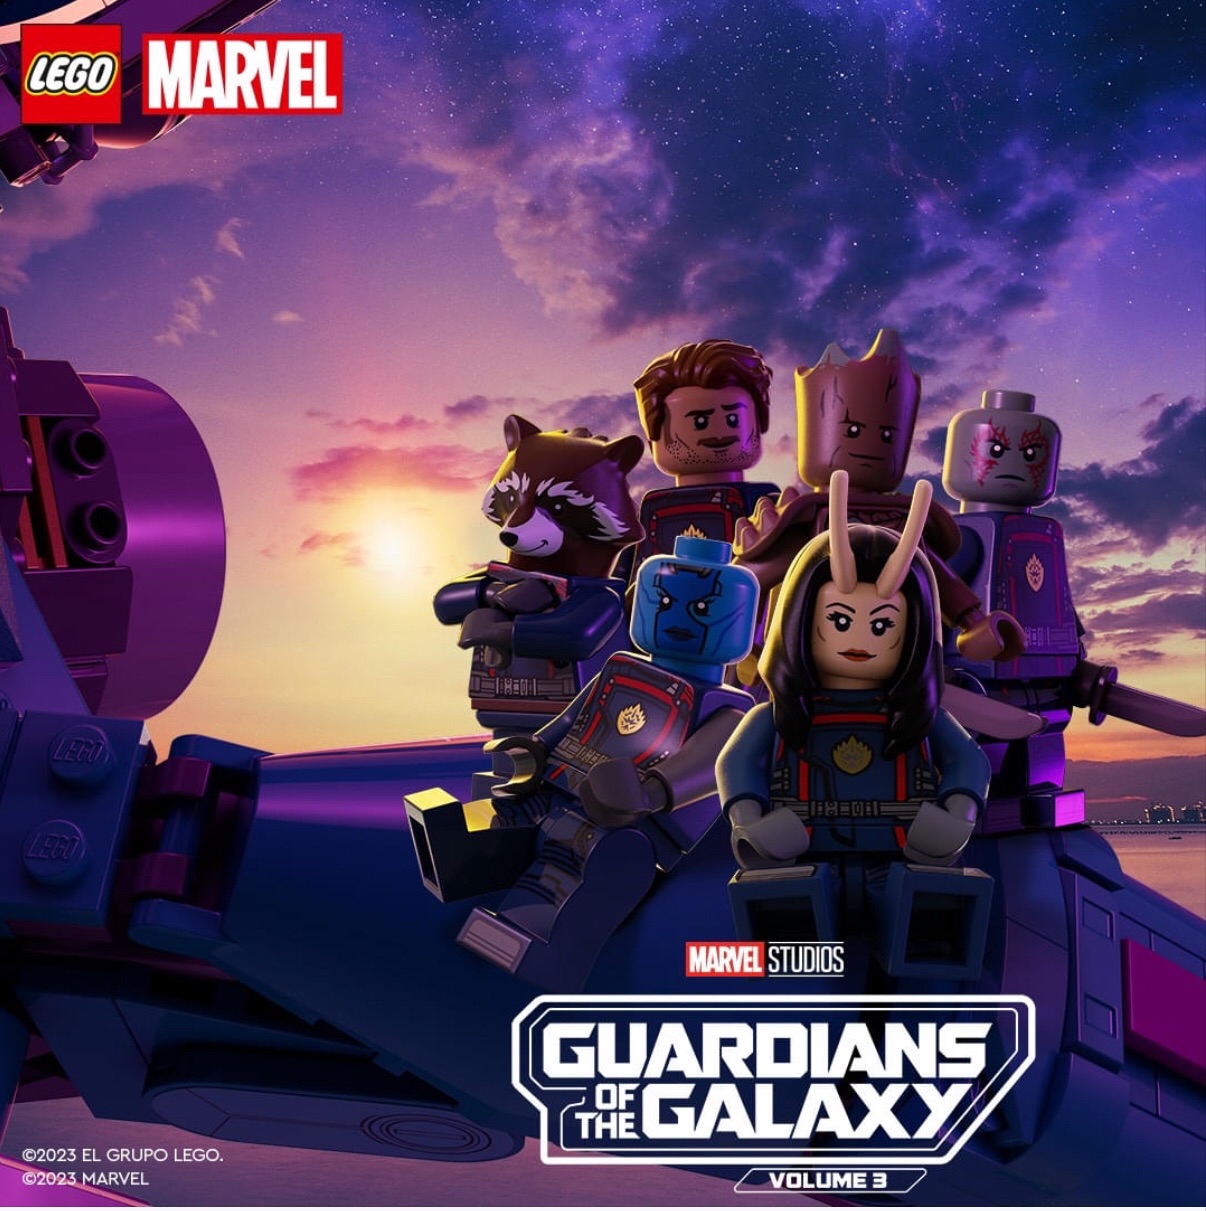 MCU - on Twitter: "A new LEGO for #GuardiansOfTheGalaxyVol3 has been released. https://t.co/9mdrv3Teug" Twitter